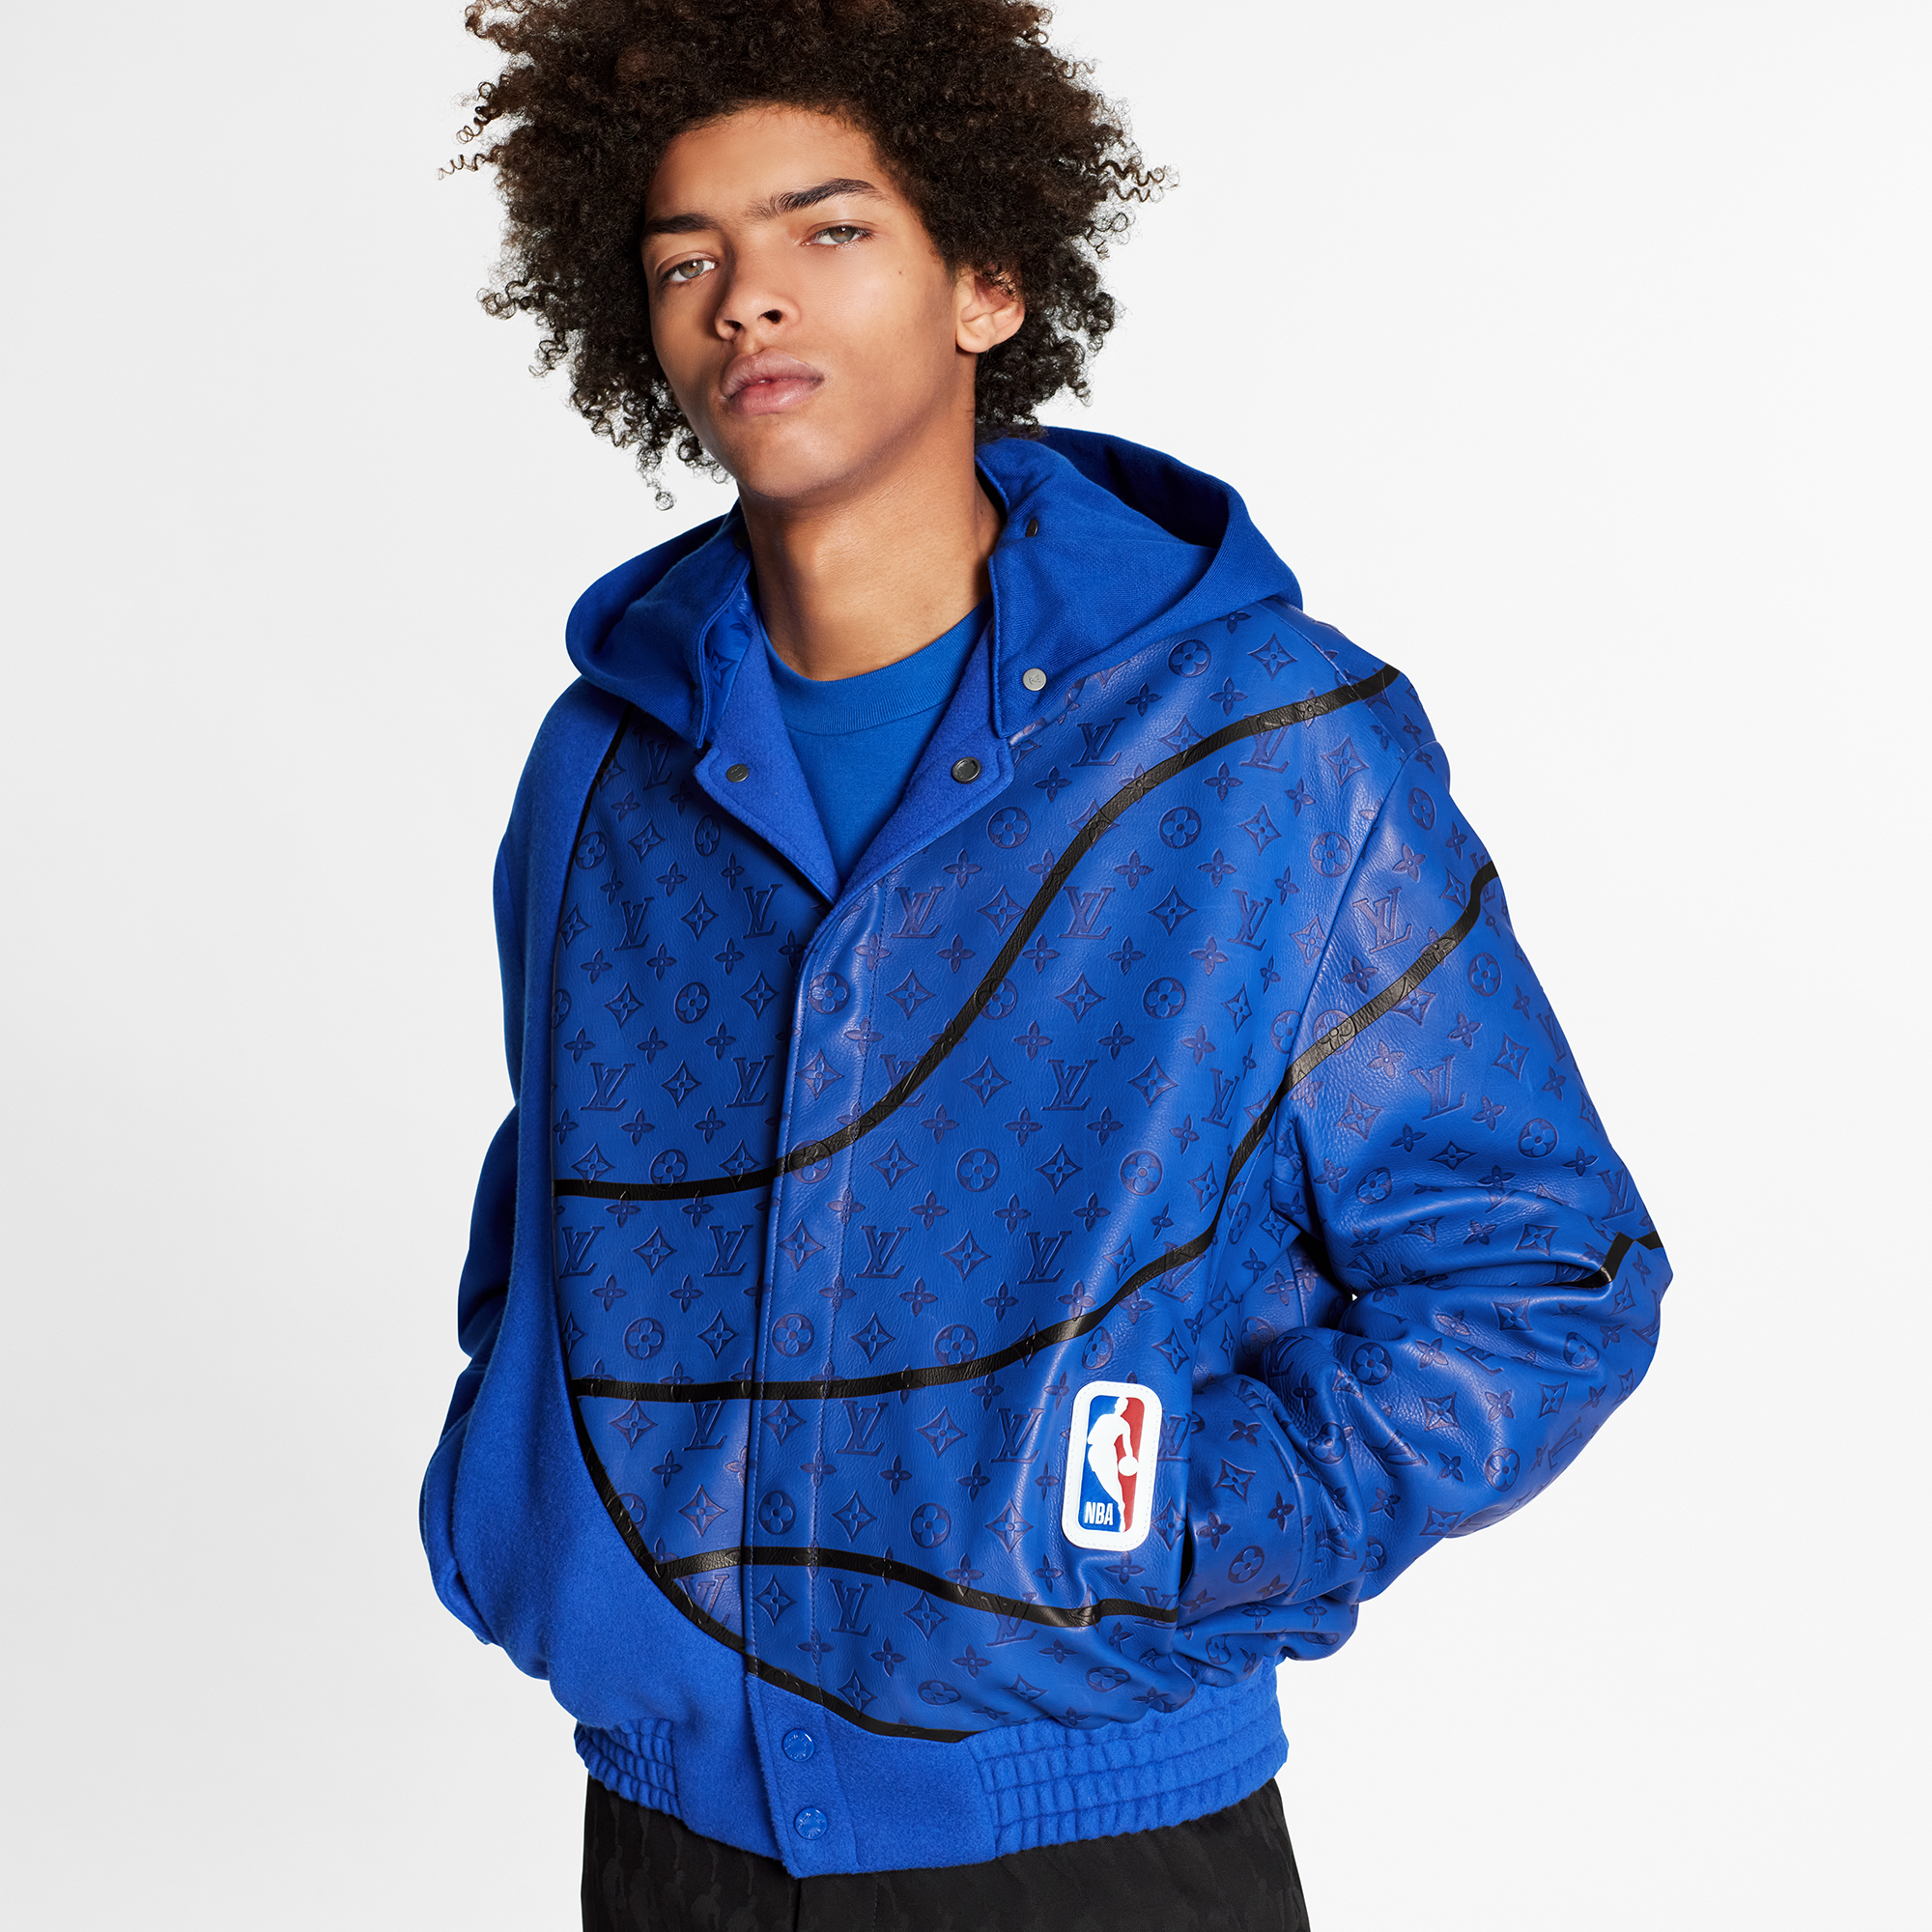 The Louis Vuitton x NBA Menswear Collection Cleverly Celebrates